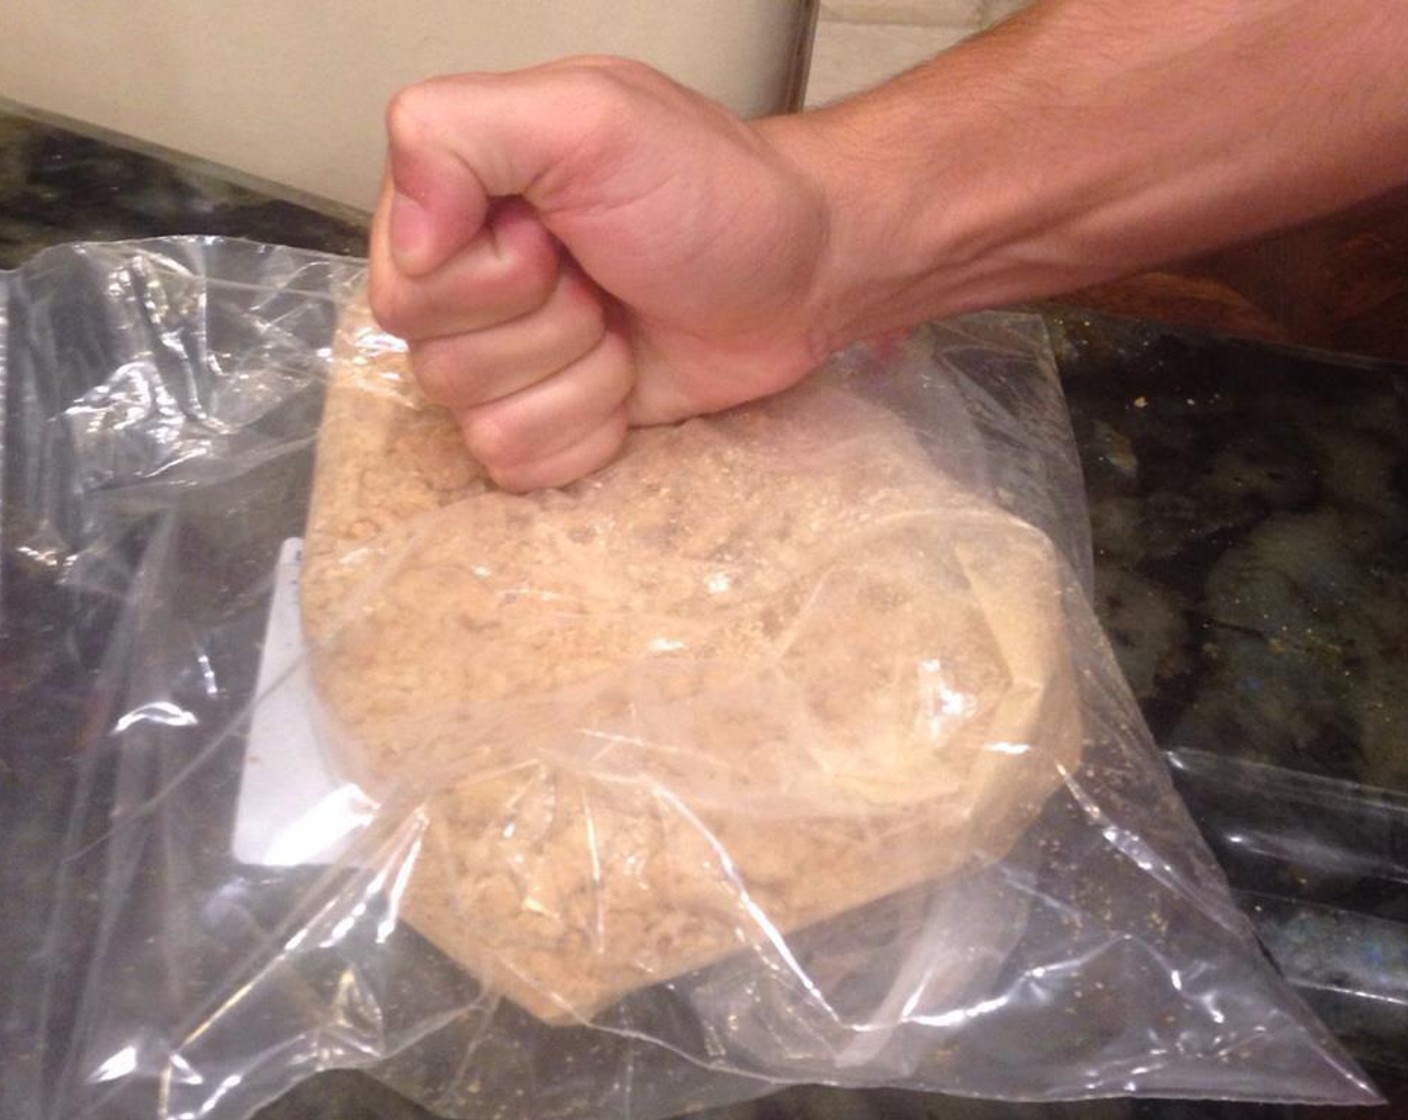 step 1 Preheat oven to 375 degrees F (190 degrees C). Place one bag of Graham Crackers (1 1/2 cups) in a ziplock bag, and either hit/punch/knead the graham crackers until they are crumbs, or roll out with a baking roller.